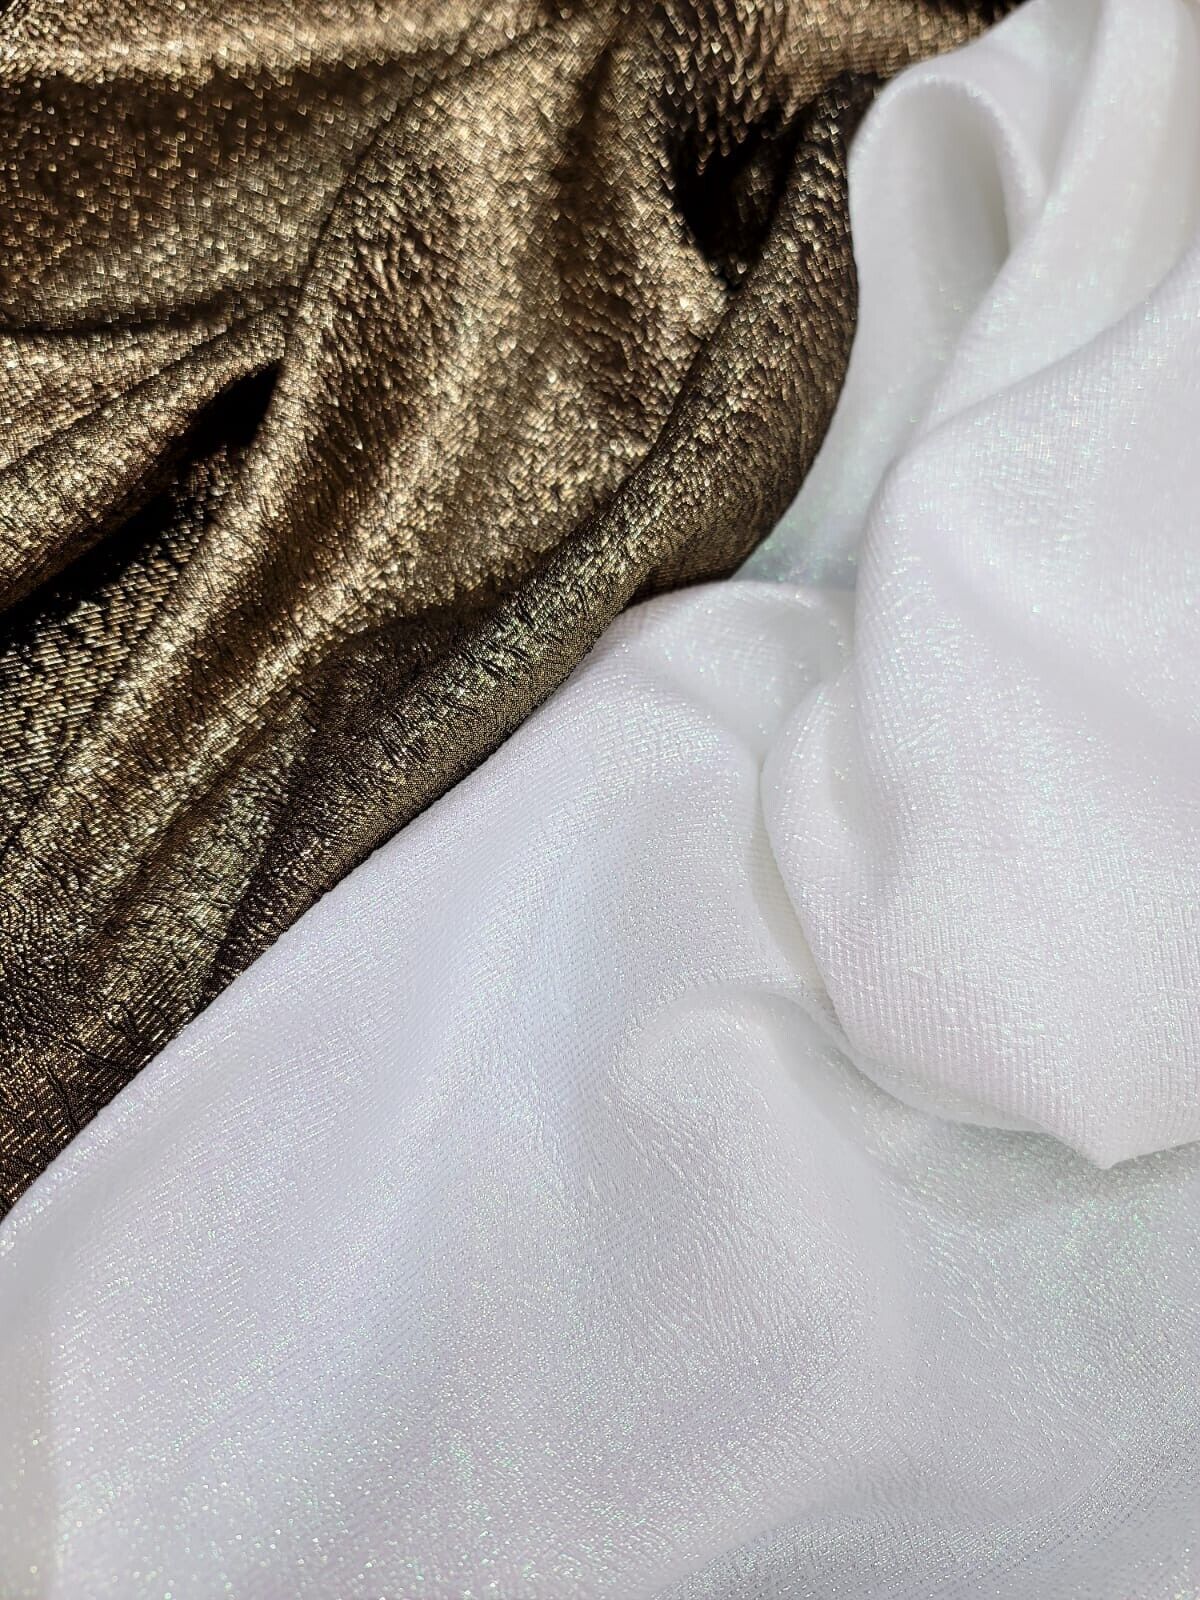 Brocade Fabric Sold By The Yard Iridescent White Textured Embossed Bridal